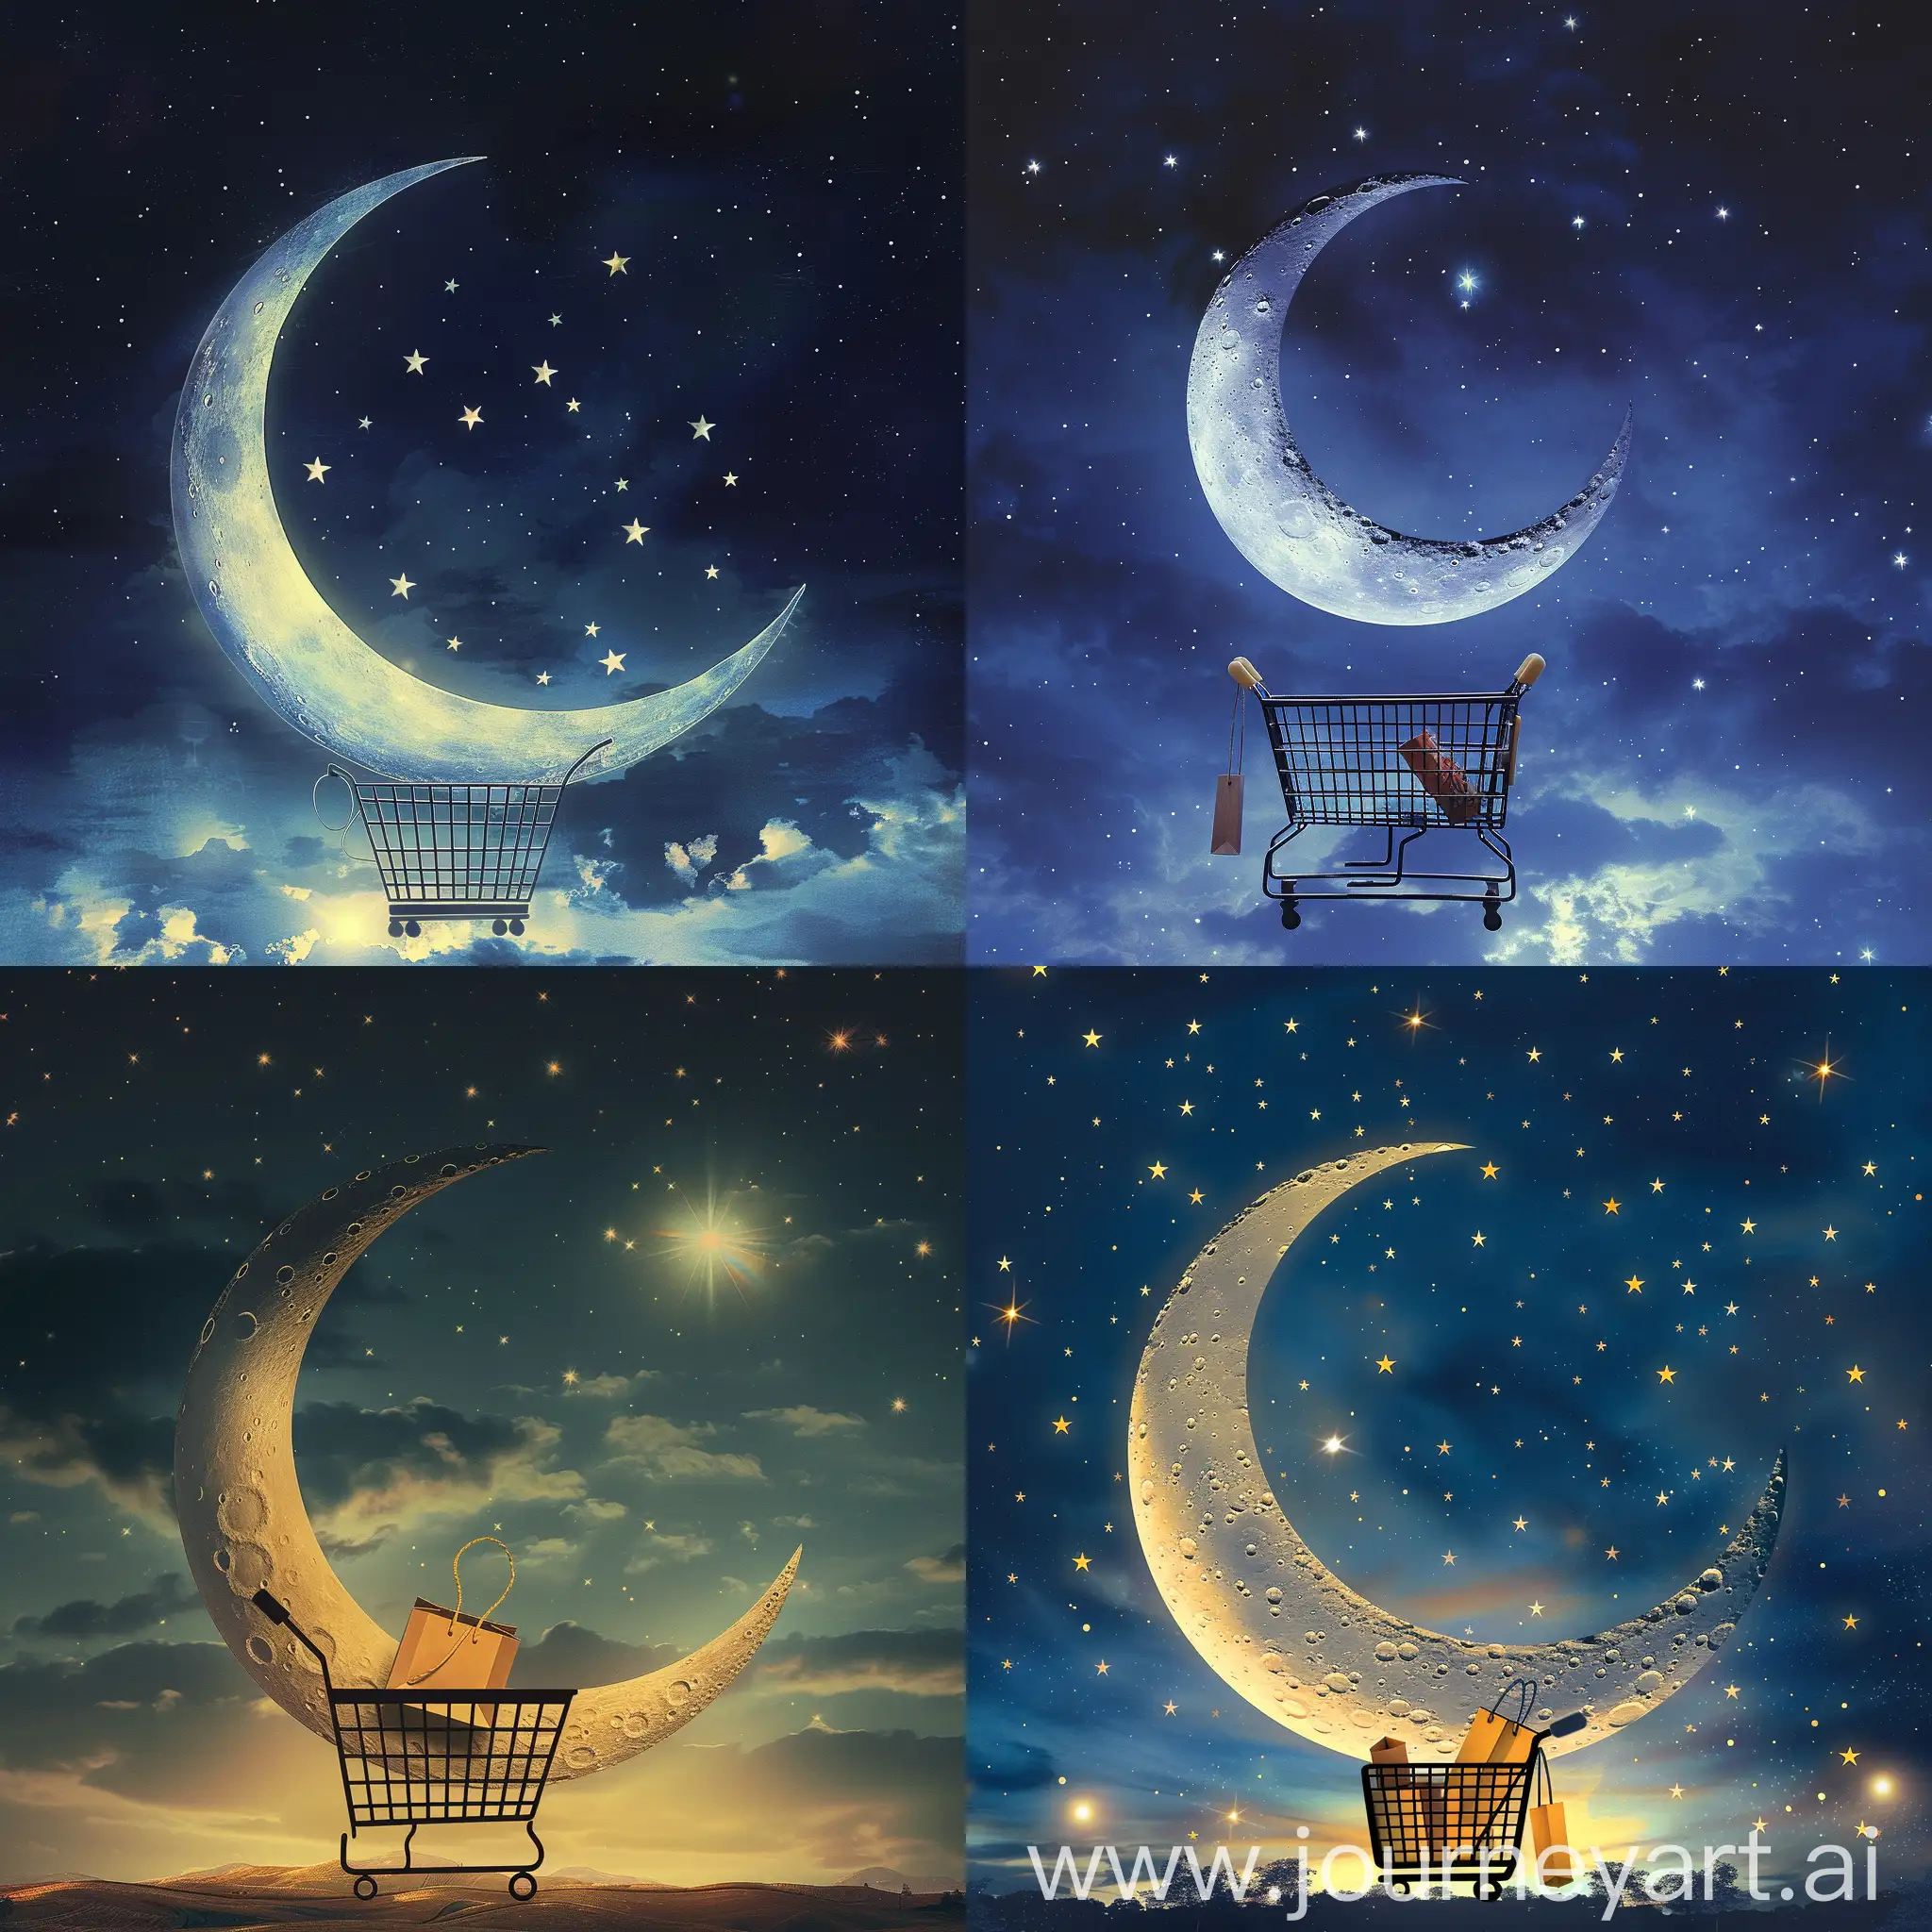 Celestial-Shopping-Under-the-Crescent-Moonlit-Night